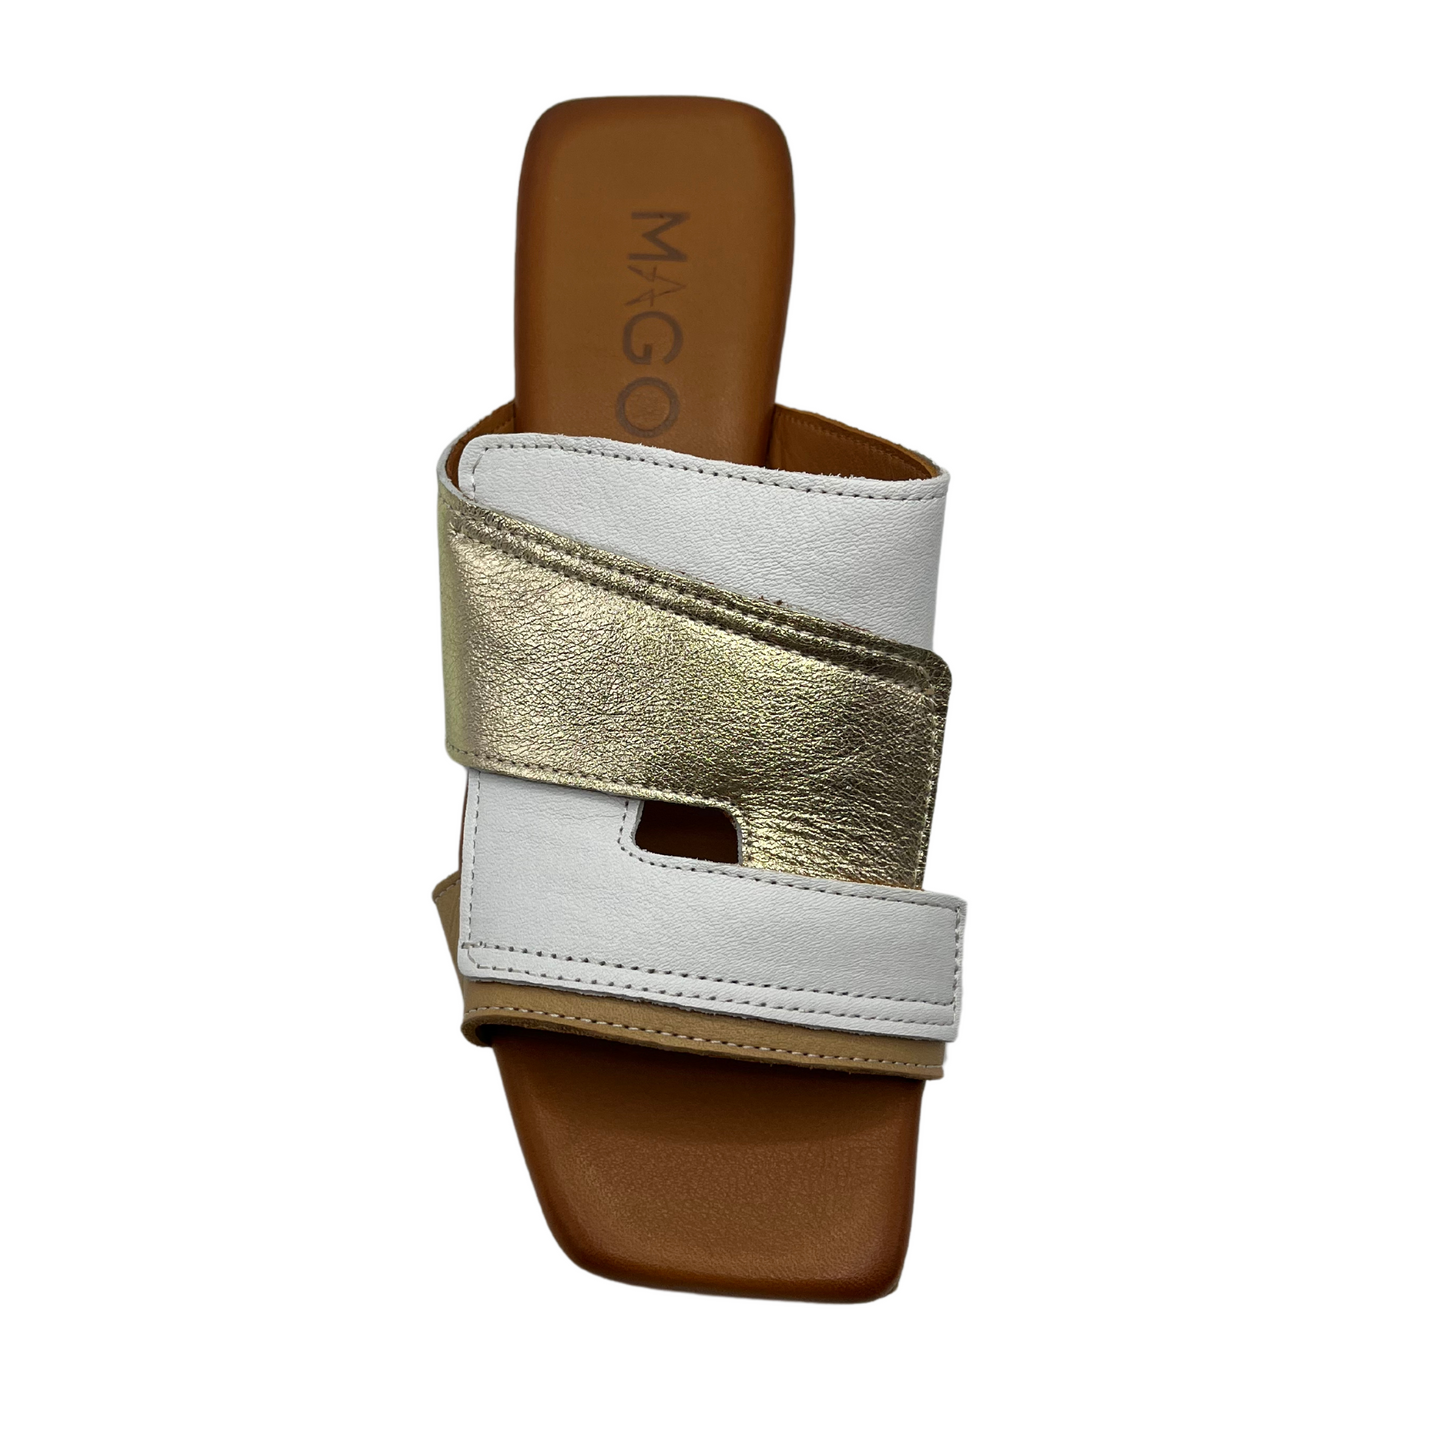 Top view with white, gold and tan leather with a square toe and block heel